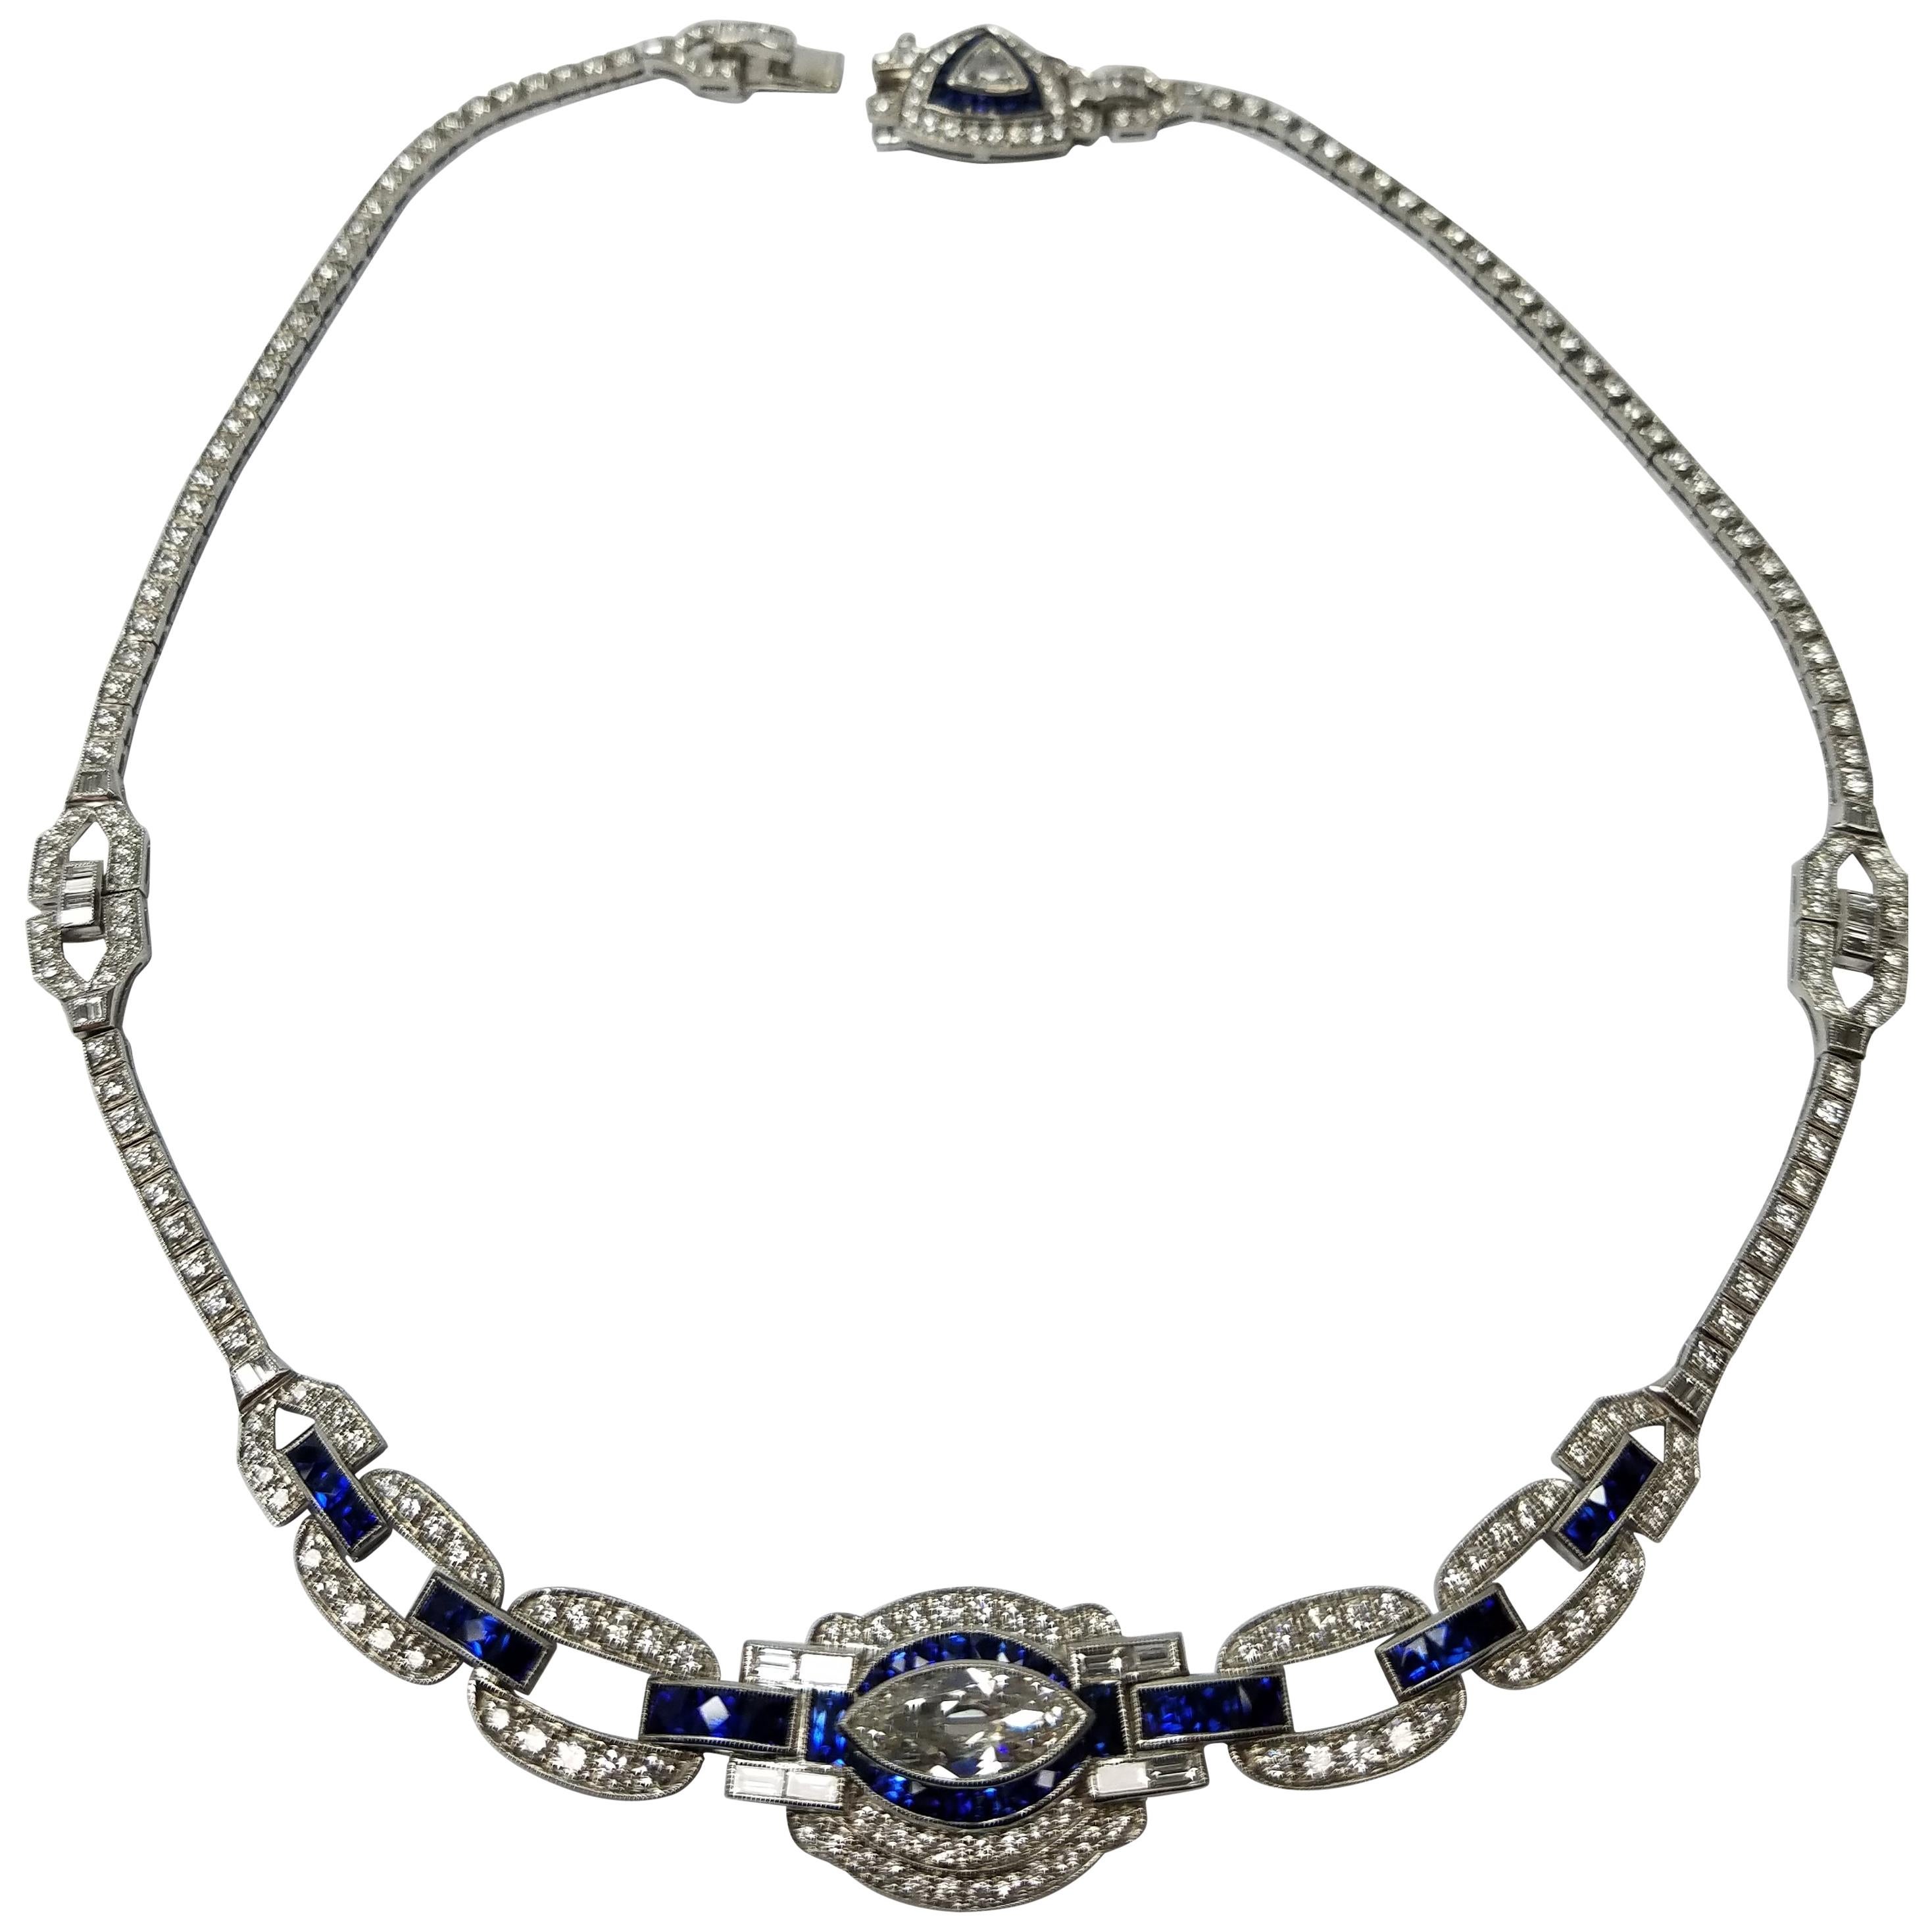 Signed Sophia D Platinum Necklace with Diamond and Sapphire